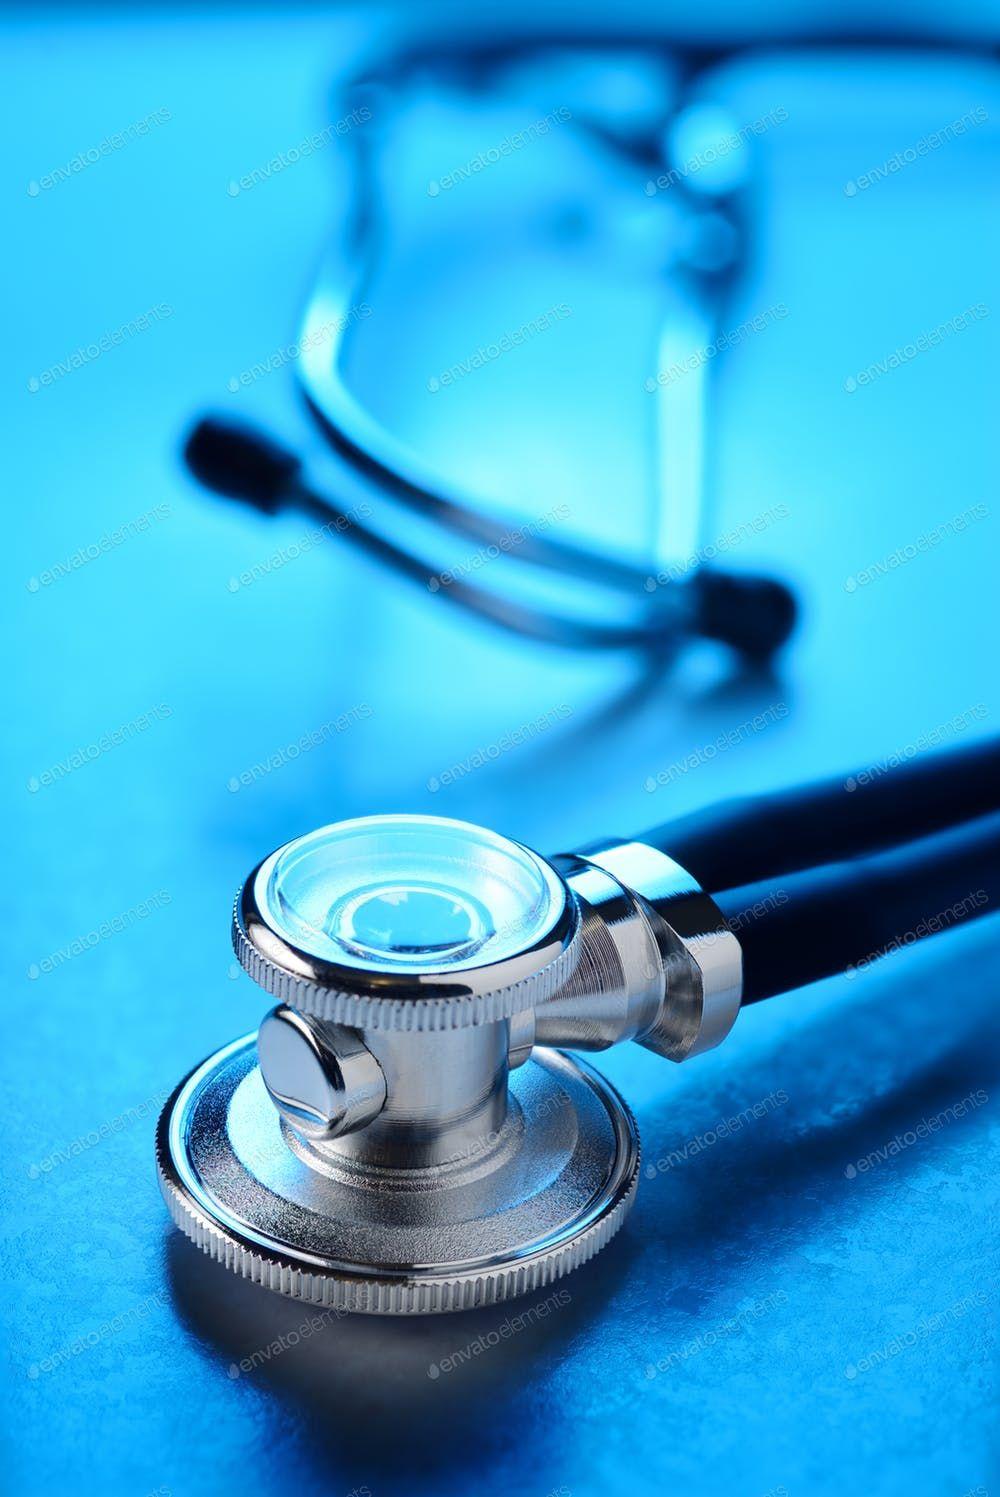 Stethoscope Sitting On Black Background, Pictures Of Stethoscopes  Background Image And Wallpaper for Free Download